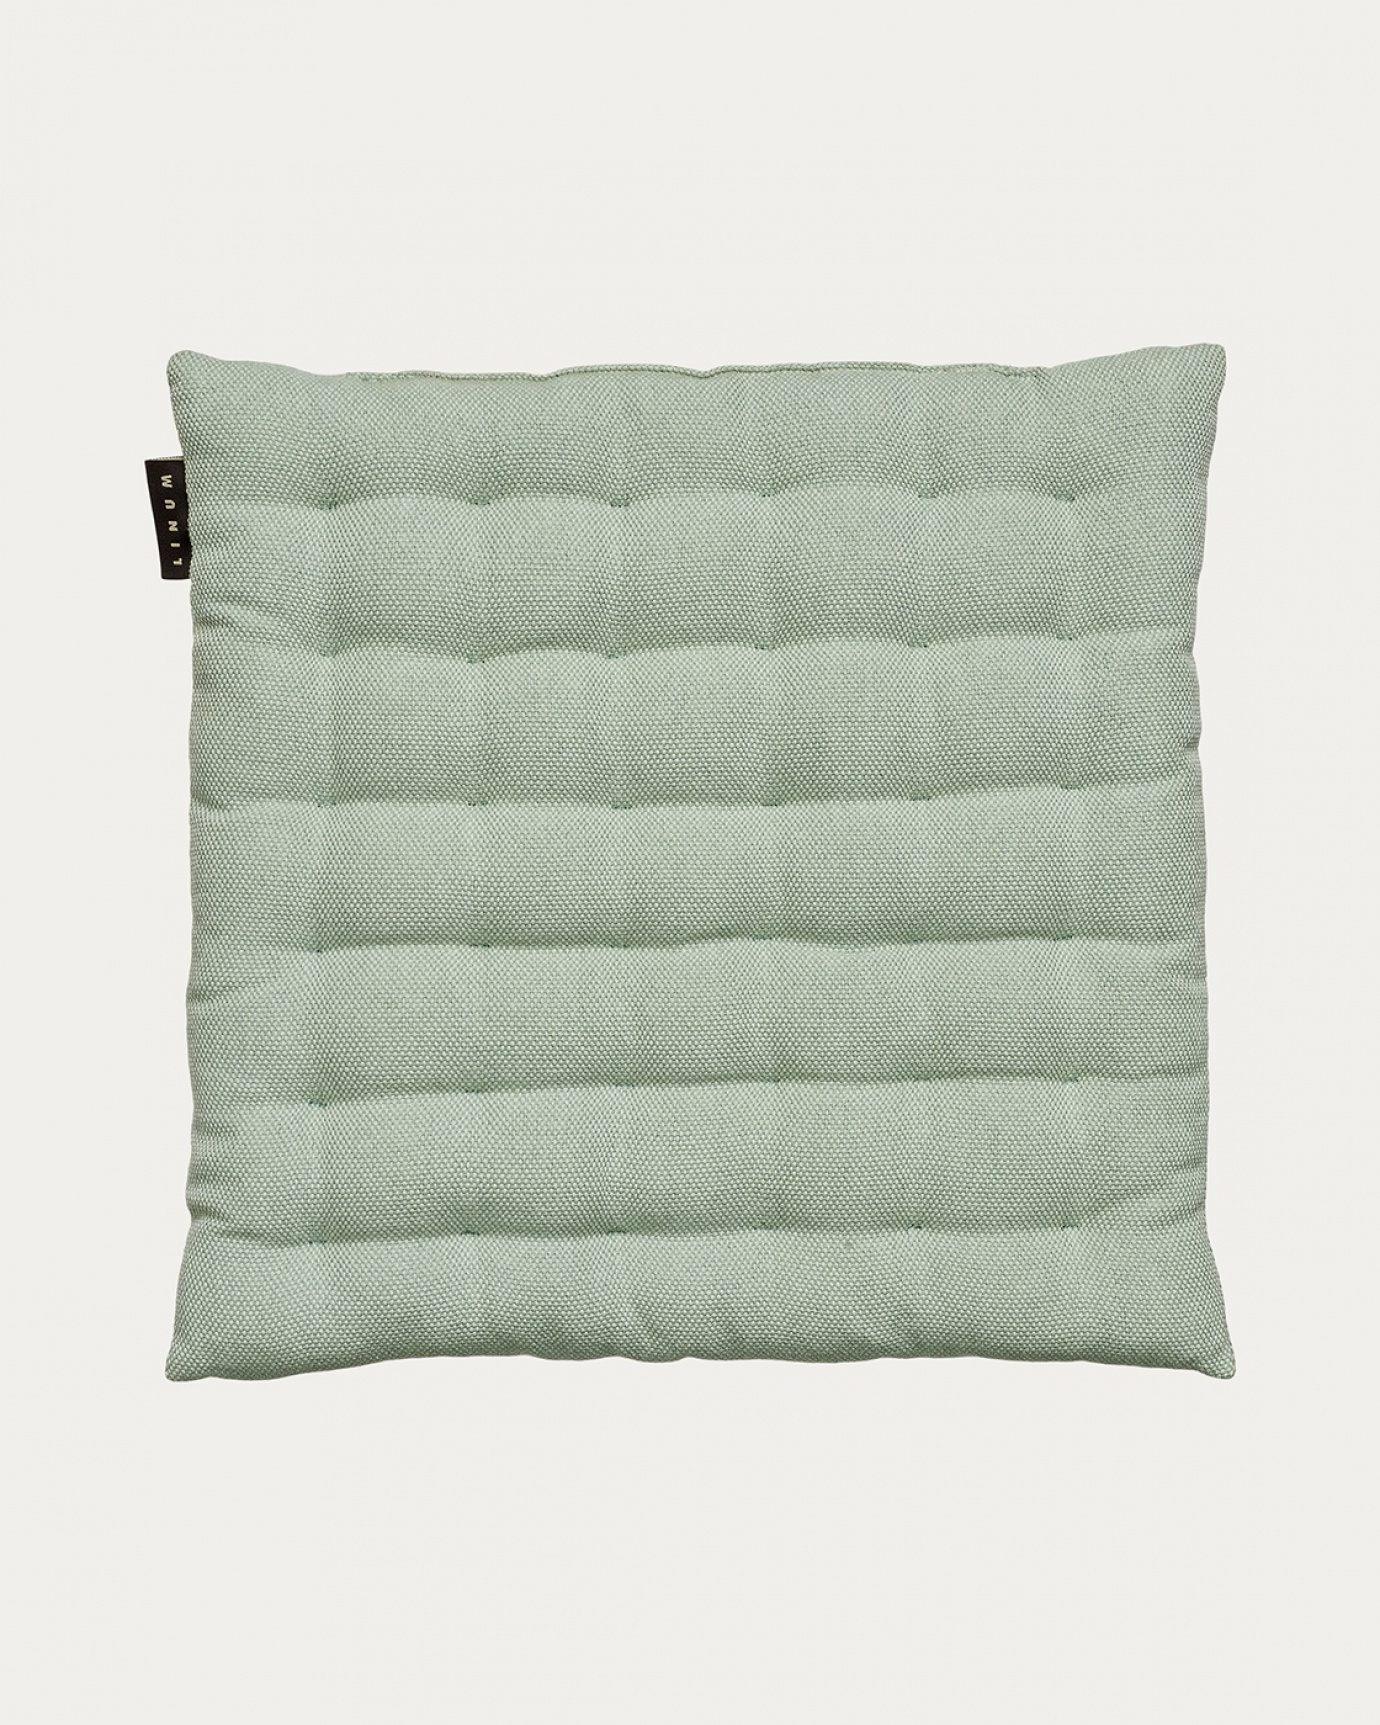 Product image light ice green PEPPER seat cushion made of soft cotton with recycled polyester filling from LINUM DESIGN. Size 40x40 cm.